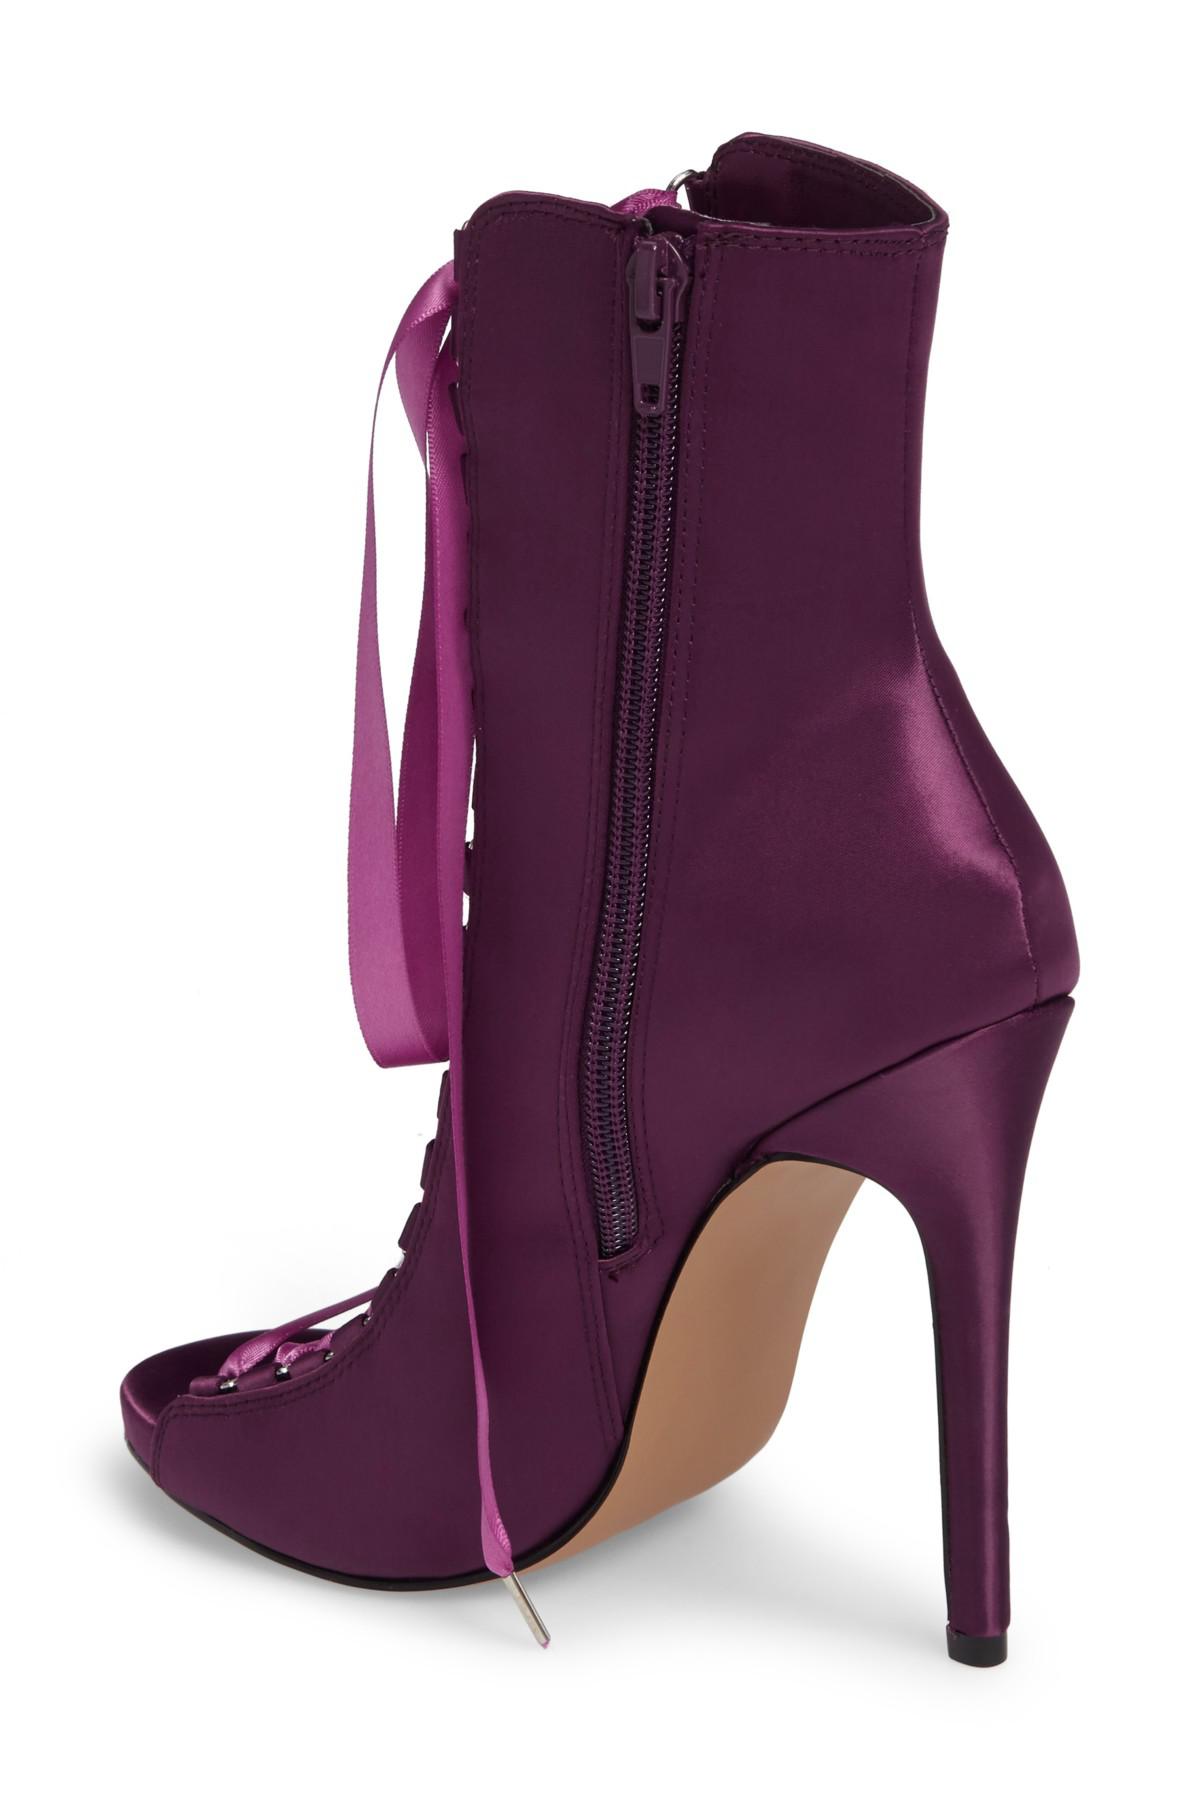 Steve Madden Satin Fuego Lace-up Bootie 